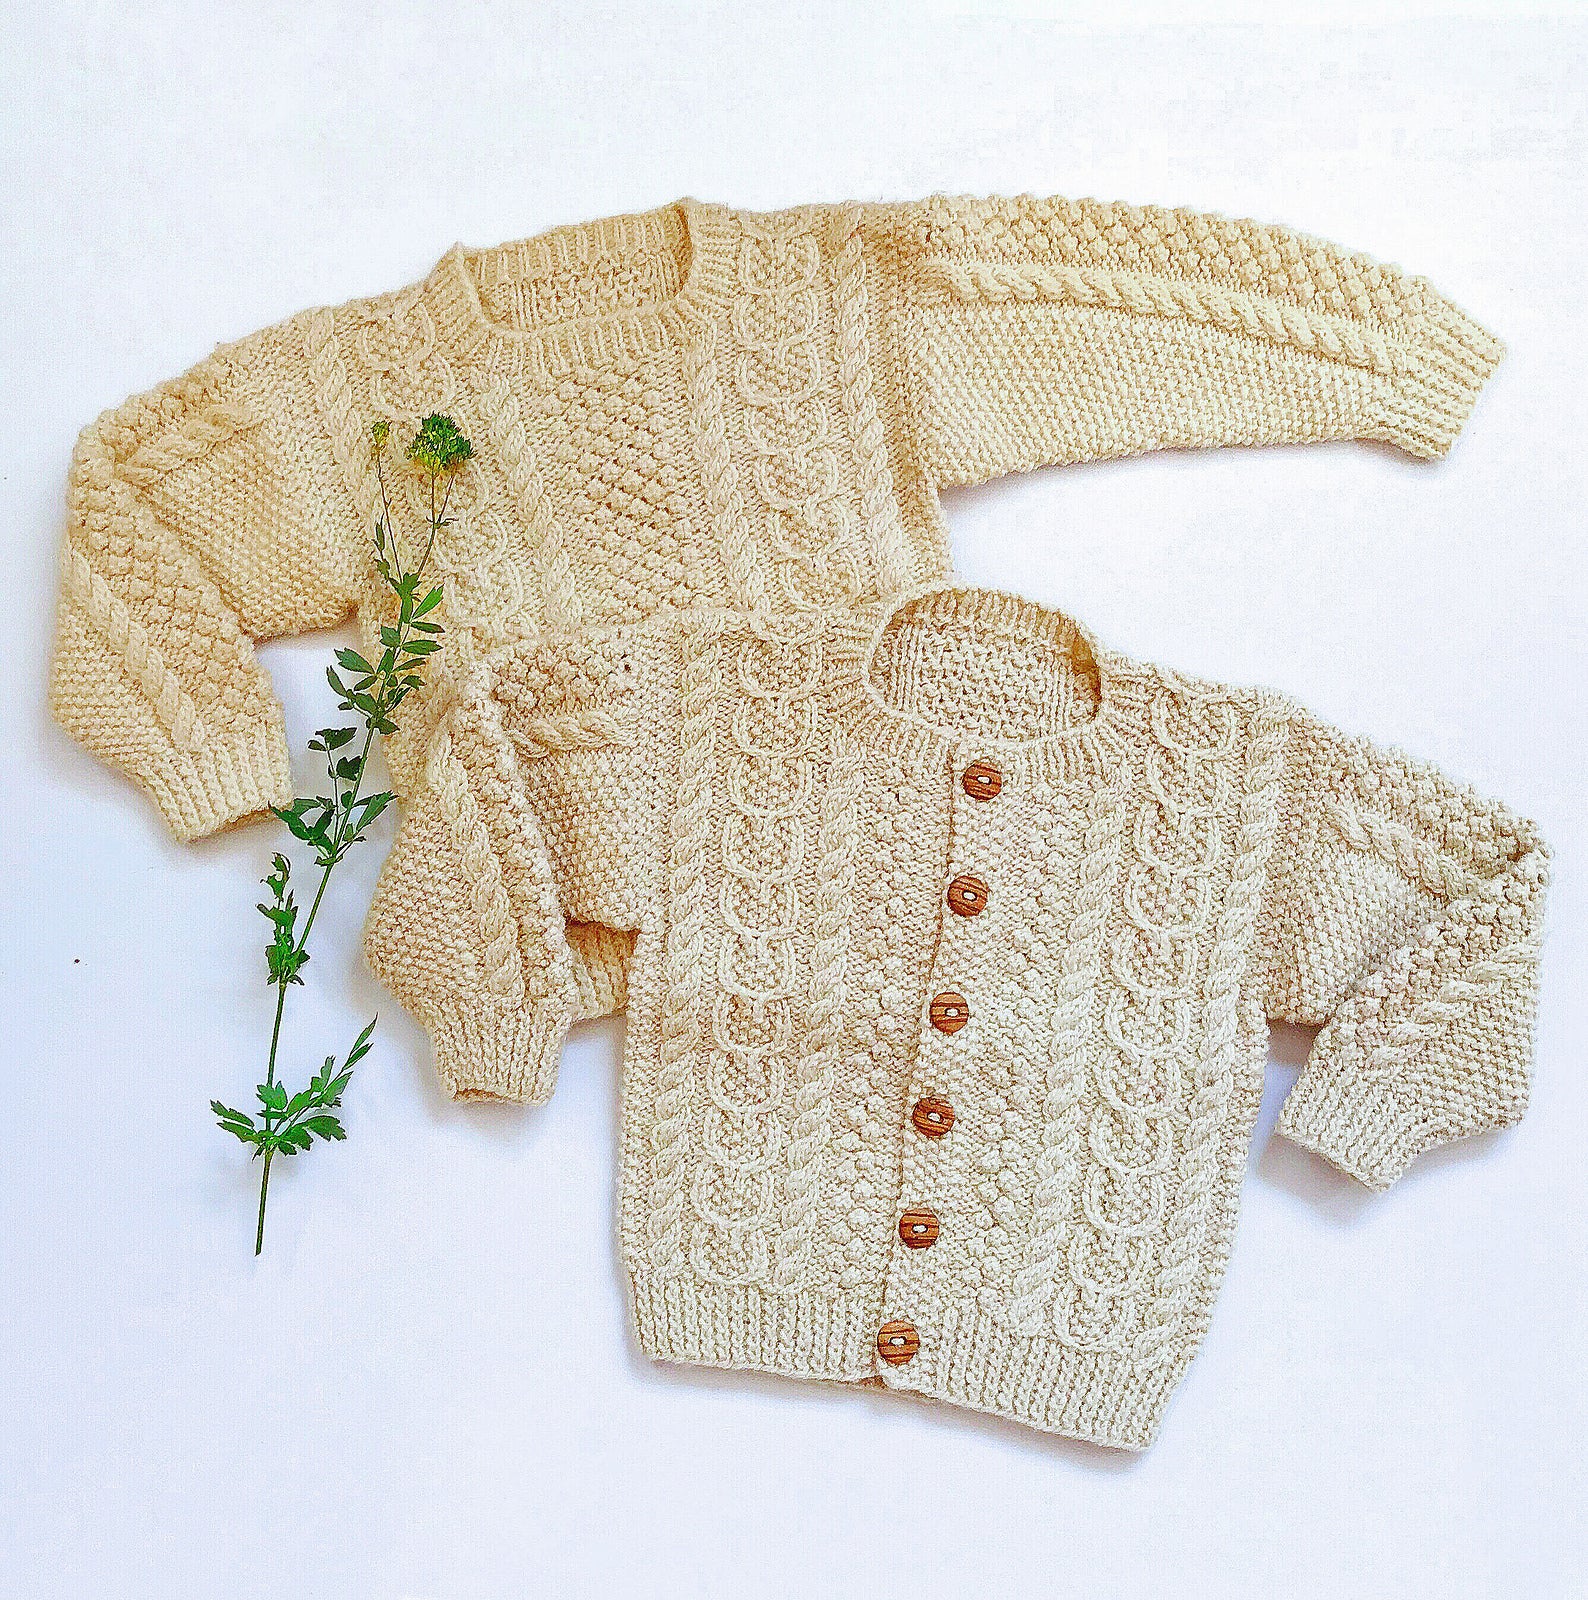 19 Free Knitting Patterns for Baby Cardigans 